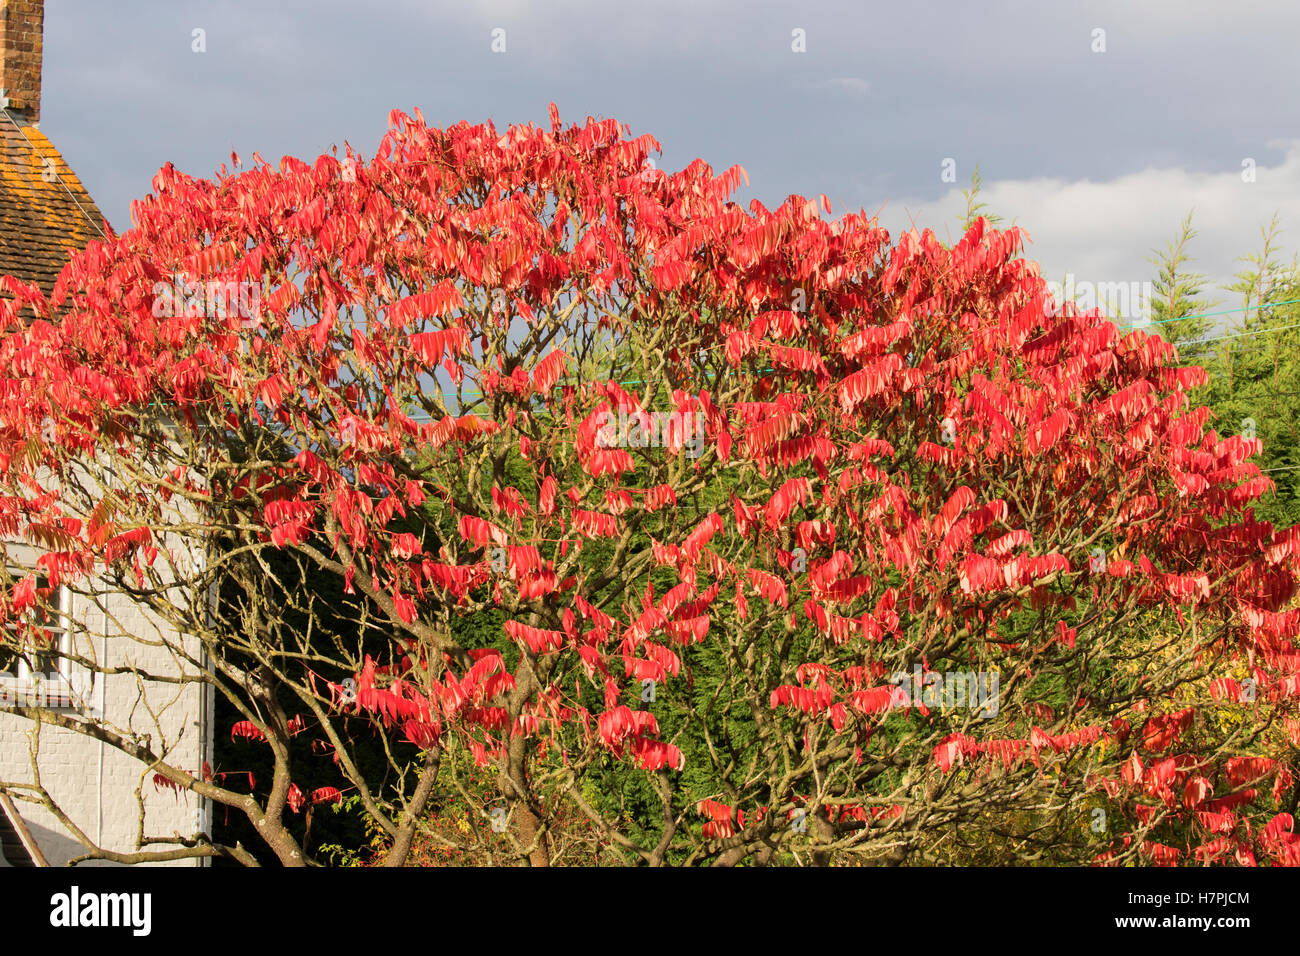 Sumach, Rhus typhina, tree with red leaves in Autumn. Worcestershire; UK Stock Photo